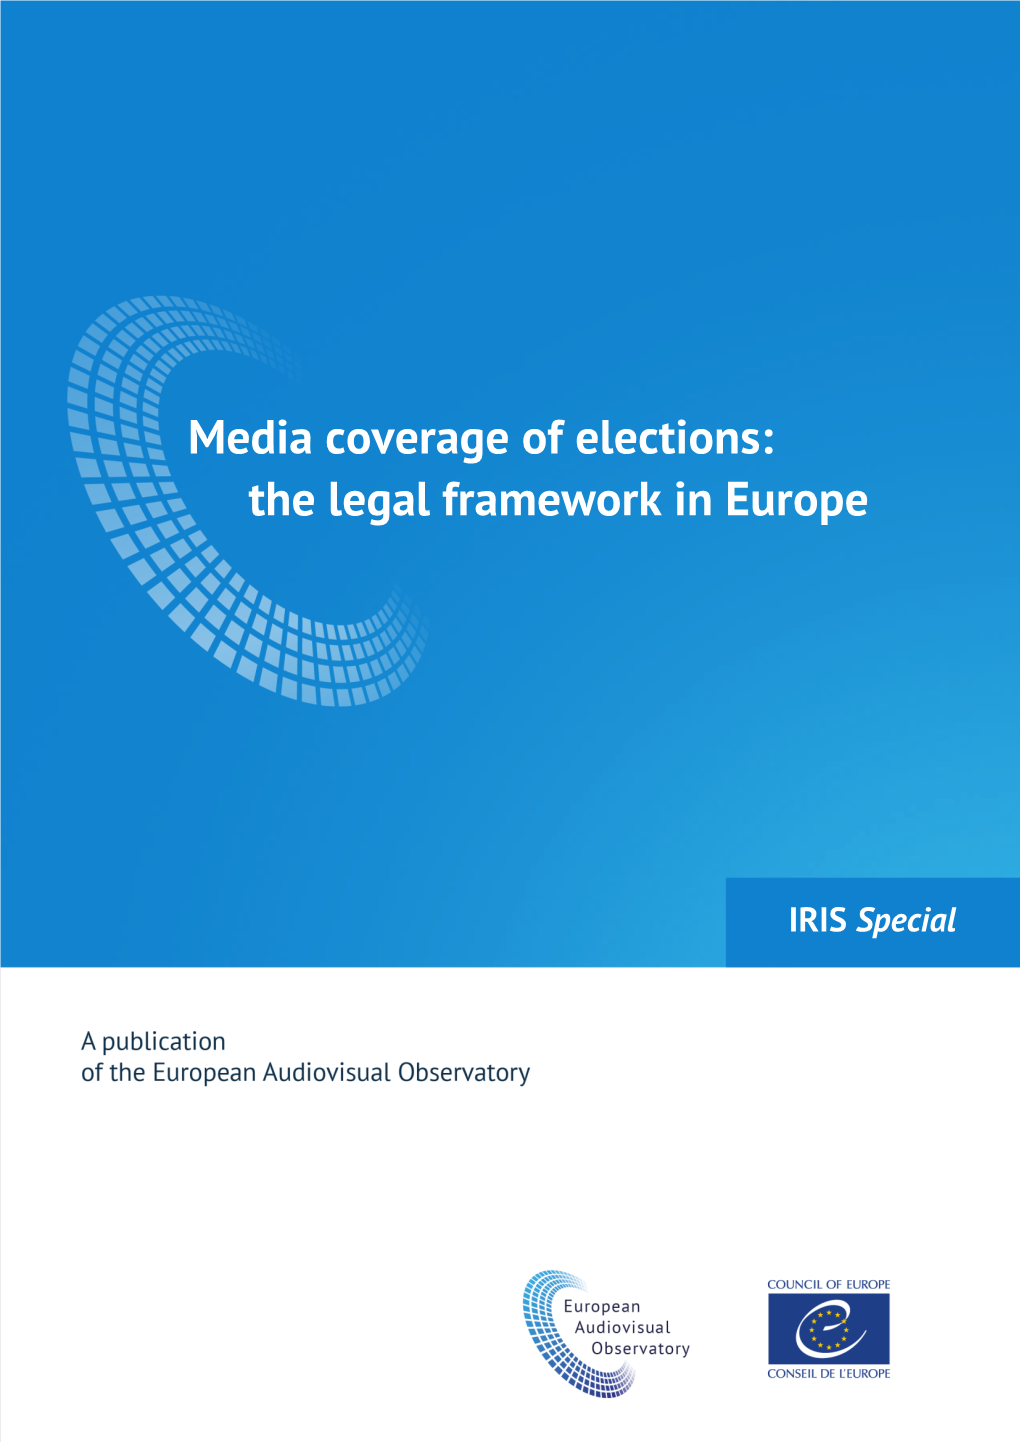 Media Coverage of Elections: the Legal Framework in Europe